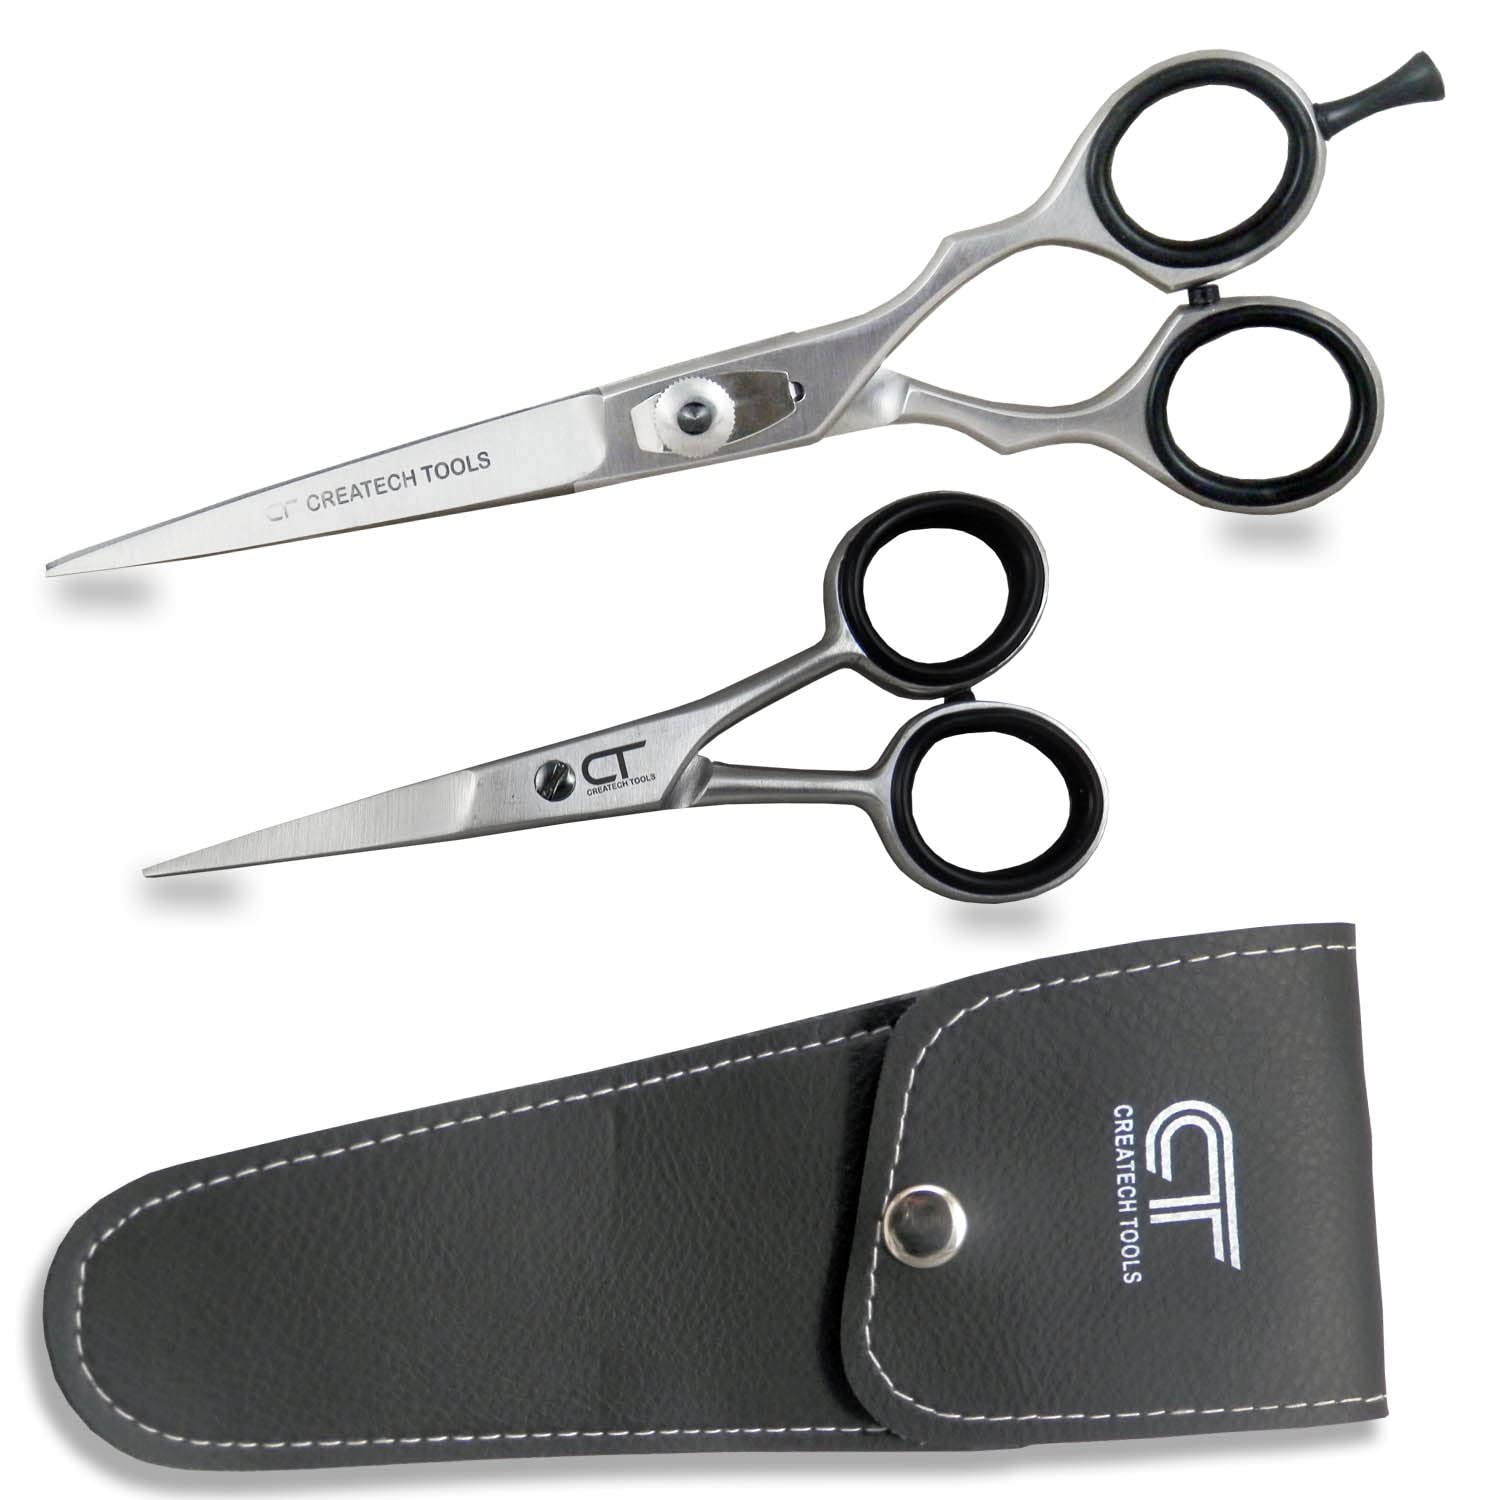 Createch Tools CT Hair Scissors Set 6 inch Hair Cutting and 4 inch